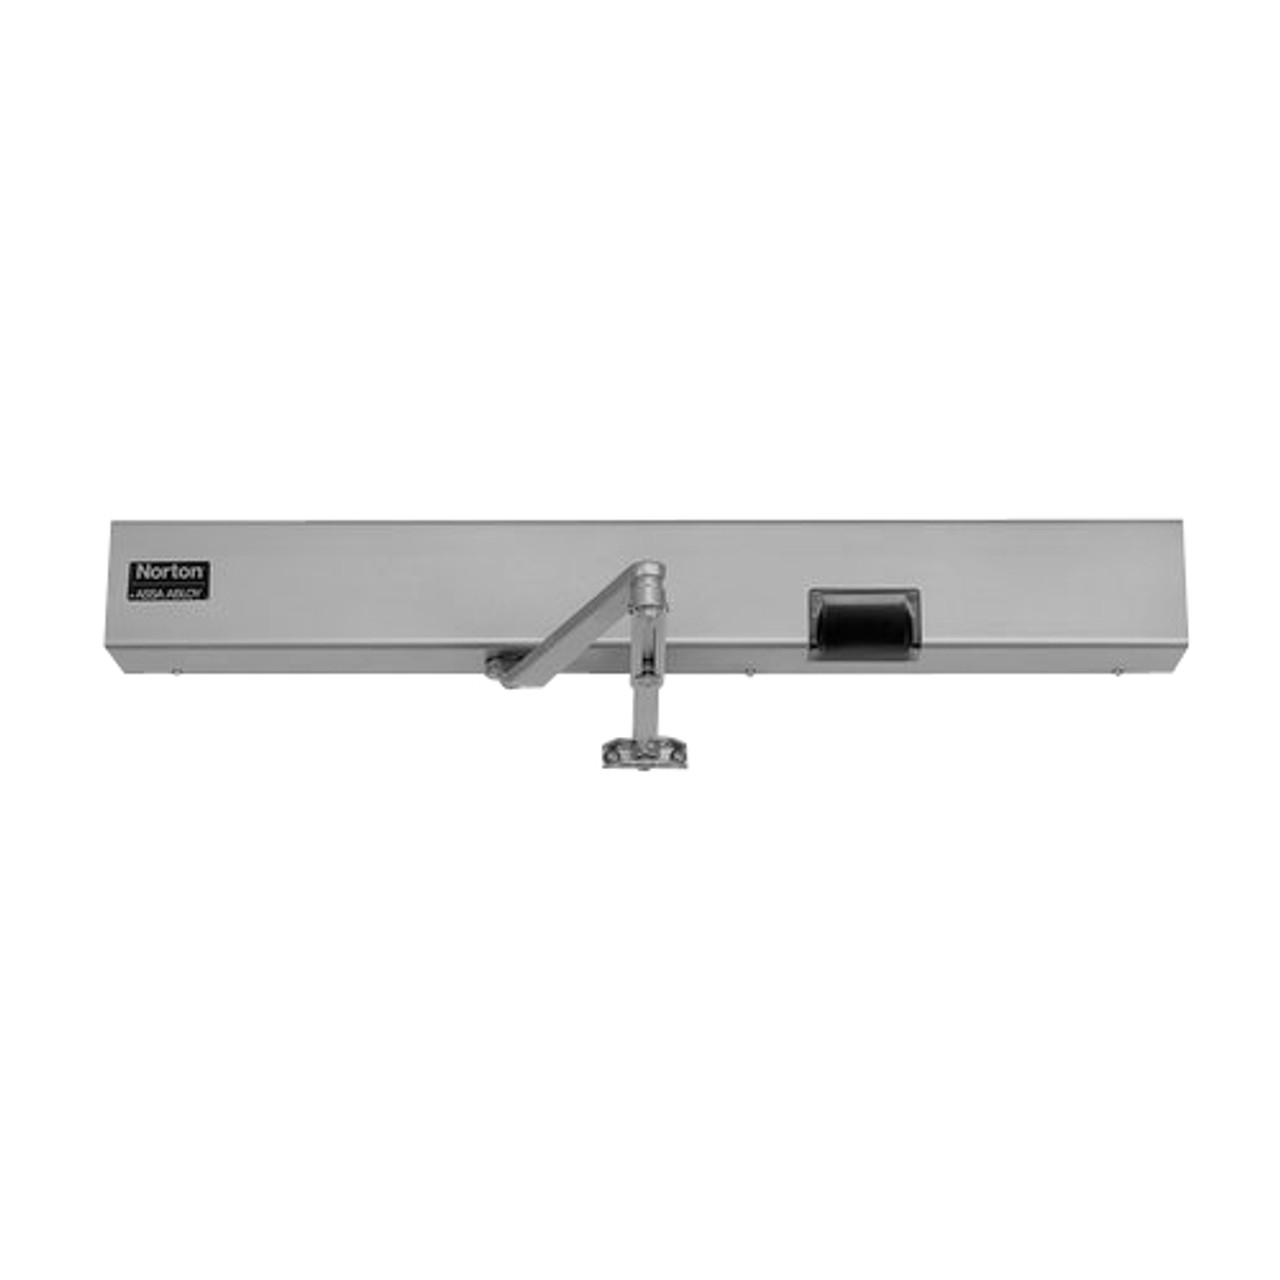 7124SZ-DZ-RH-120VAC-689 Norton 7100SZ Series Safe Zone Multi-Point Closer/Holder with Motion Sensor and Push Side Double Lever 11 inch Main Arm in Aluminum Finish